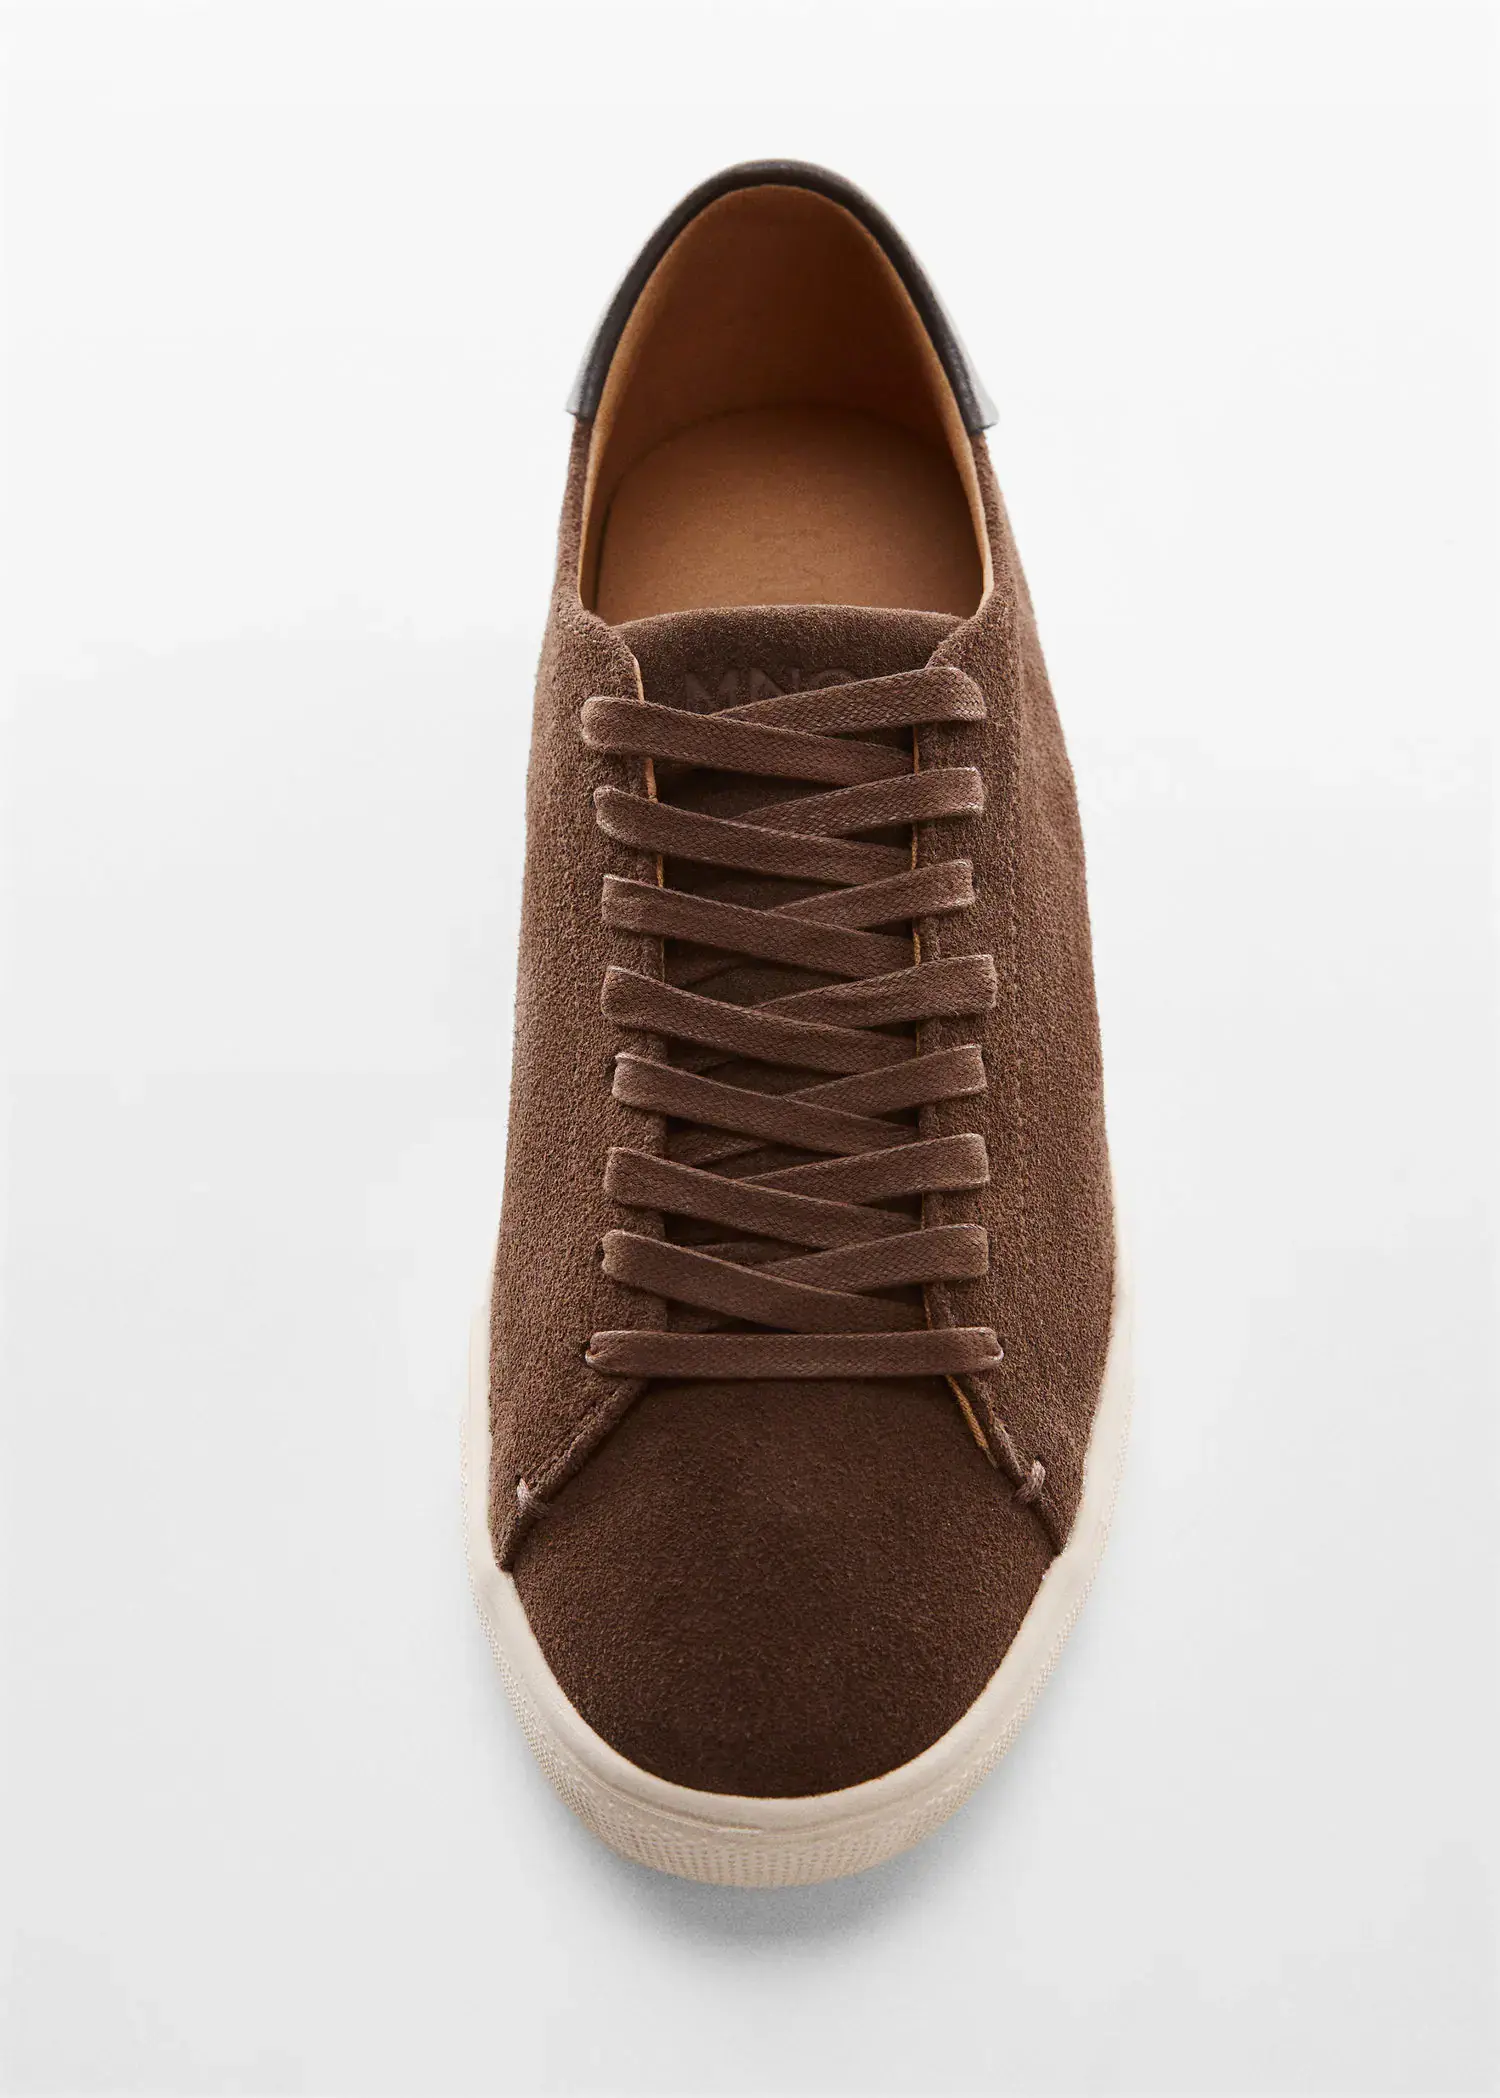 Mango Laces suede sneaker. a pair of brown shoes on a white surface. 